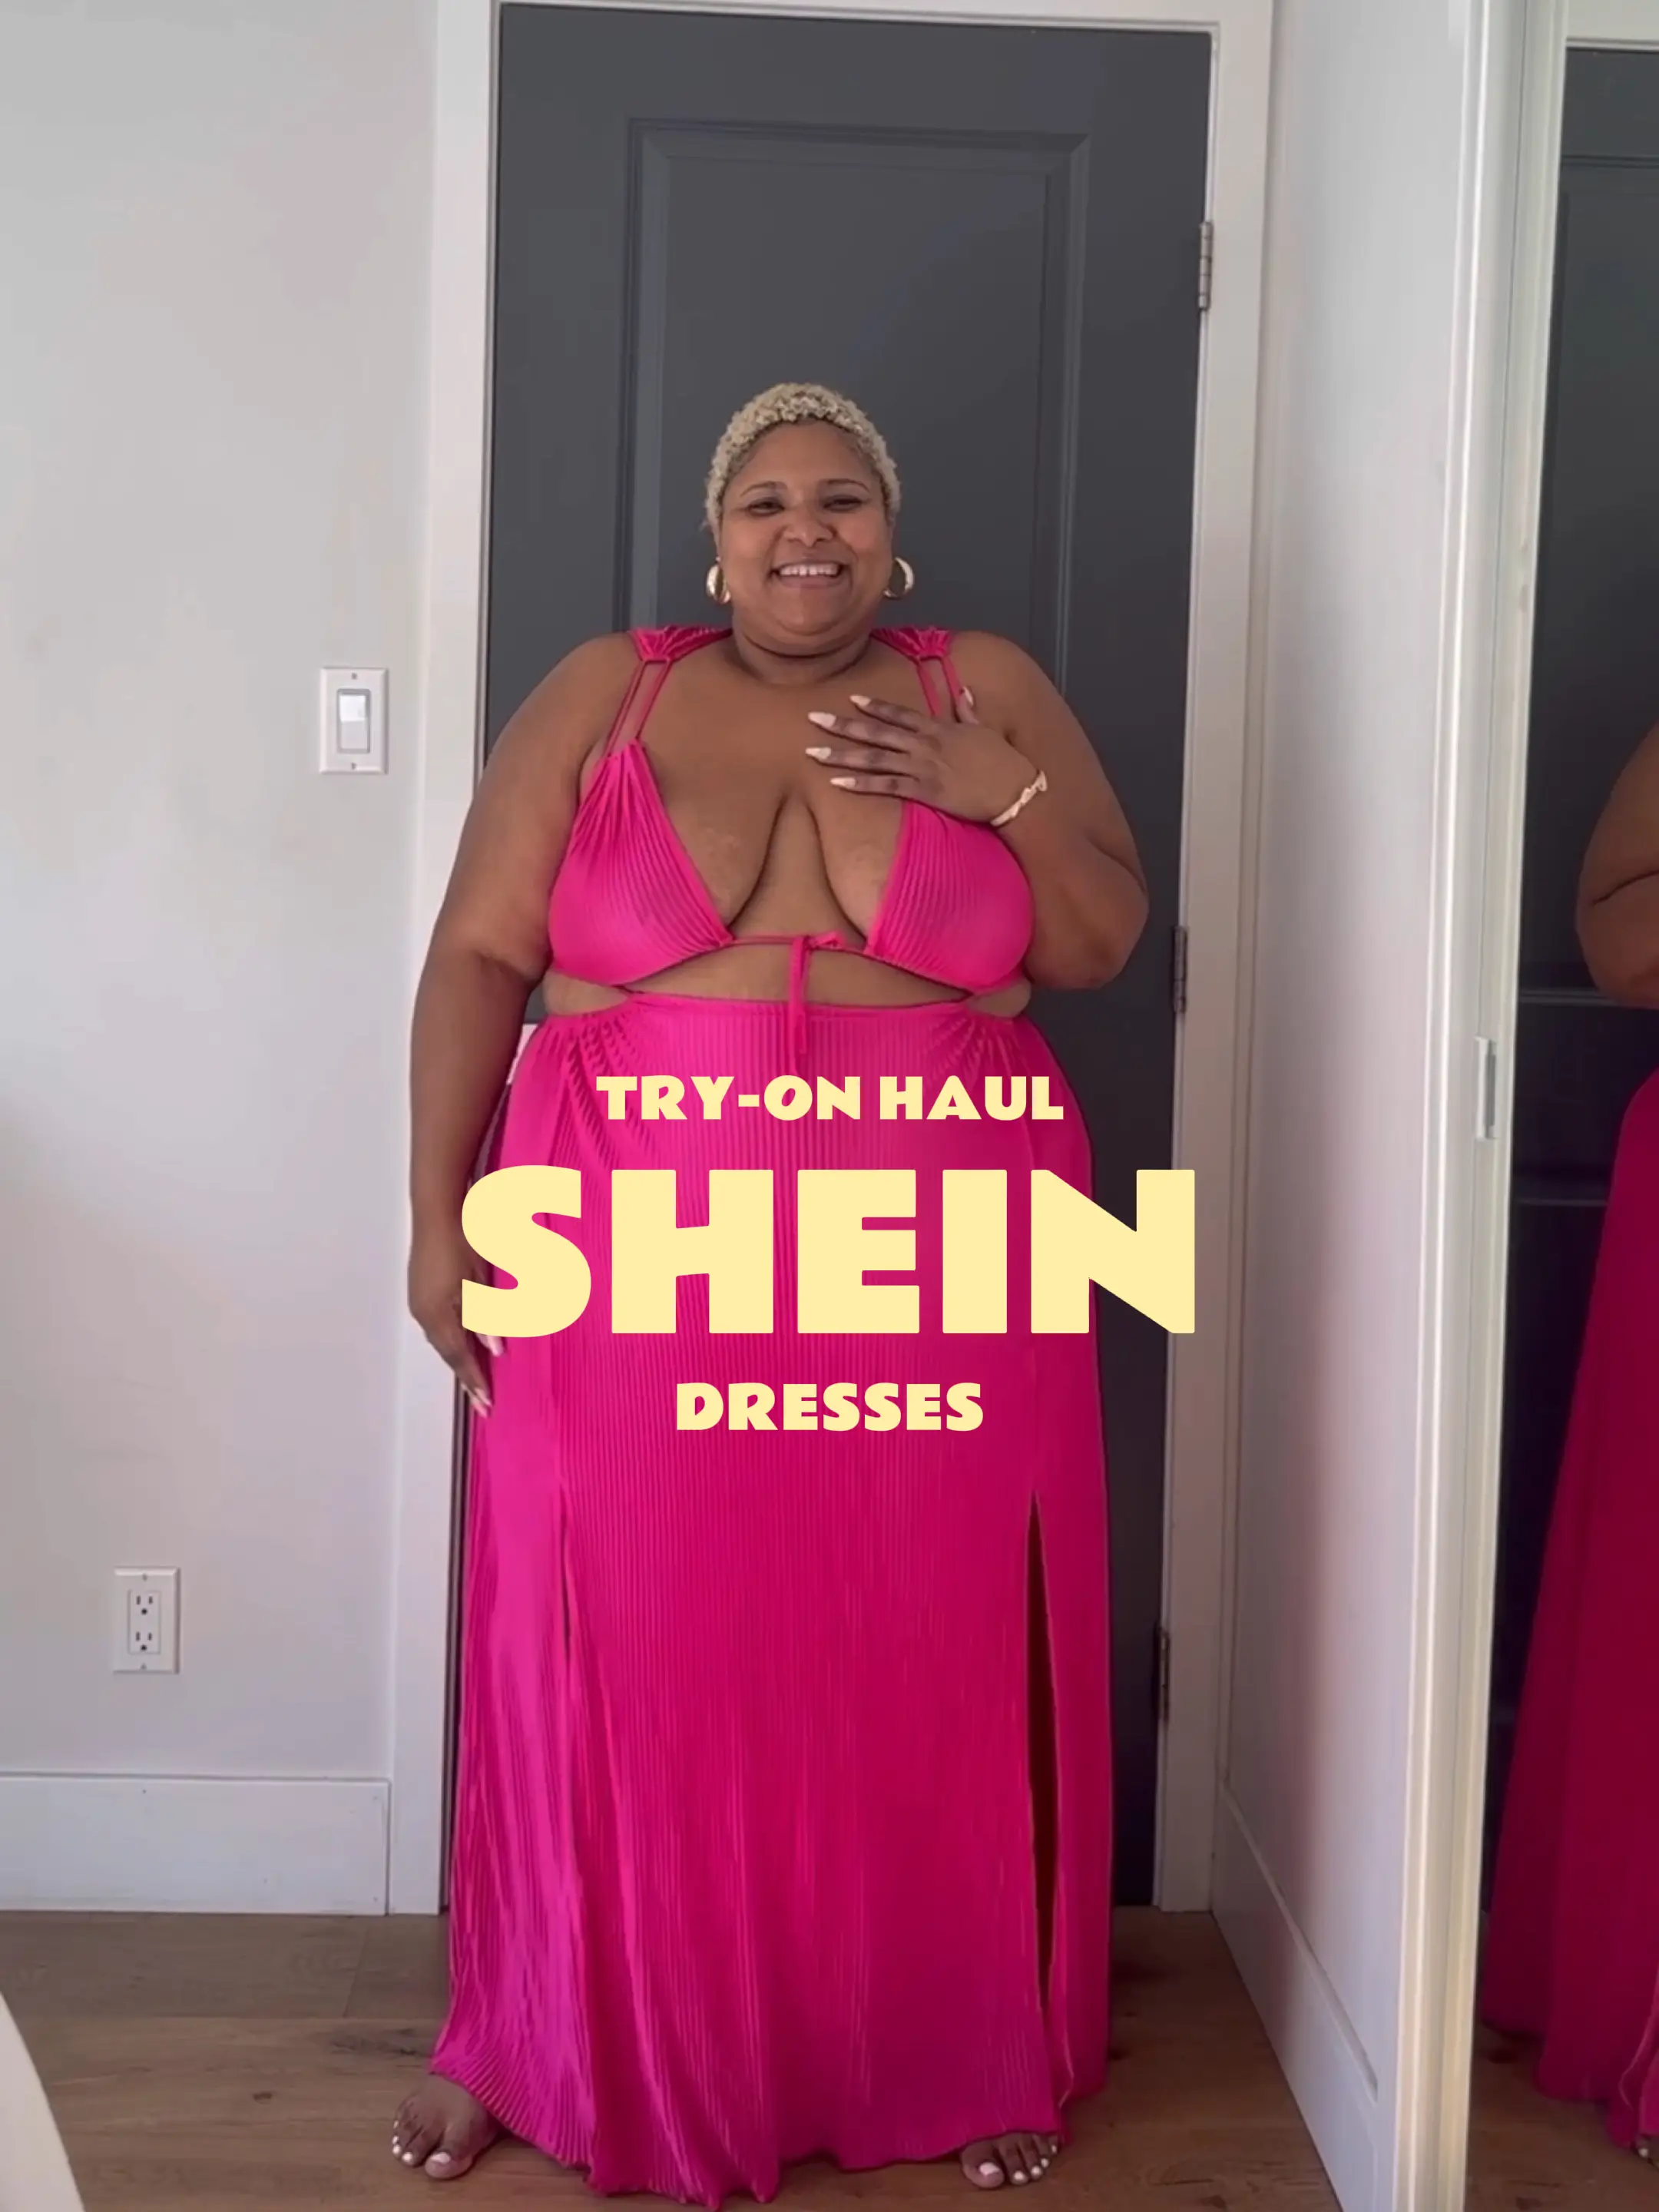 SHEIN TRY-ON HAUL - AFFORDABLE SPRING CLOTHES